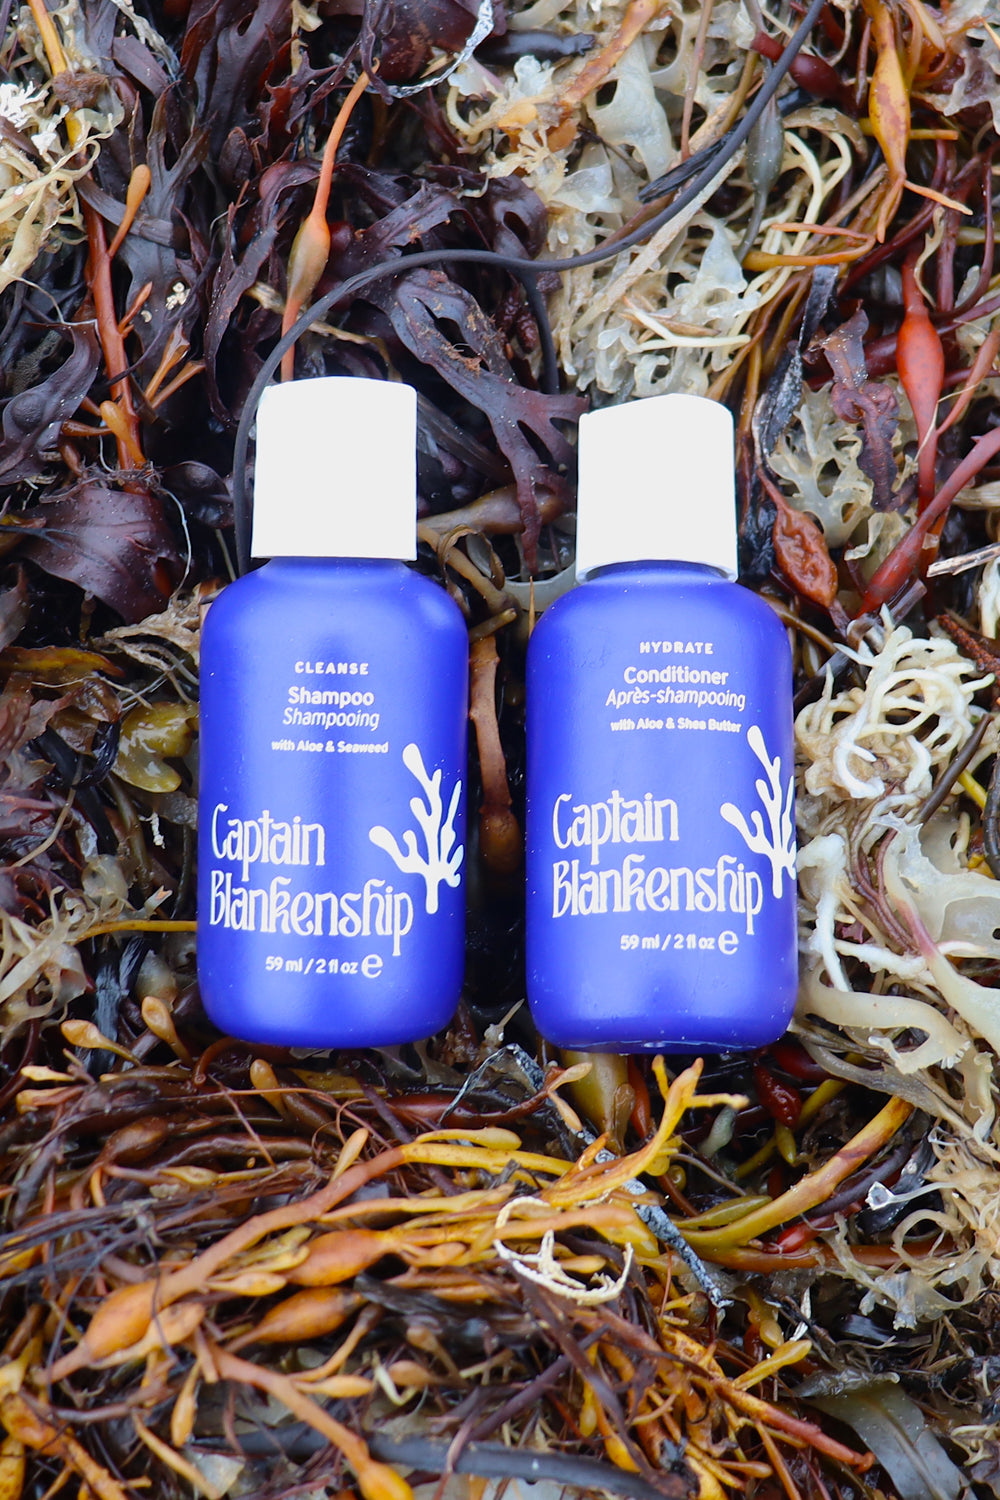 Travel Size Trial Size Captain Blankenship Shampoo and Conditioner